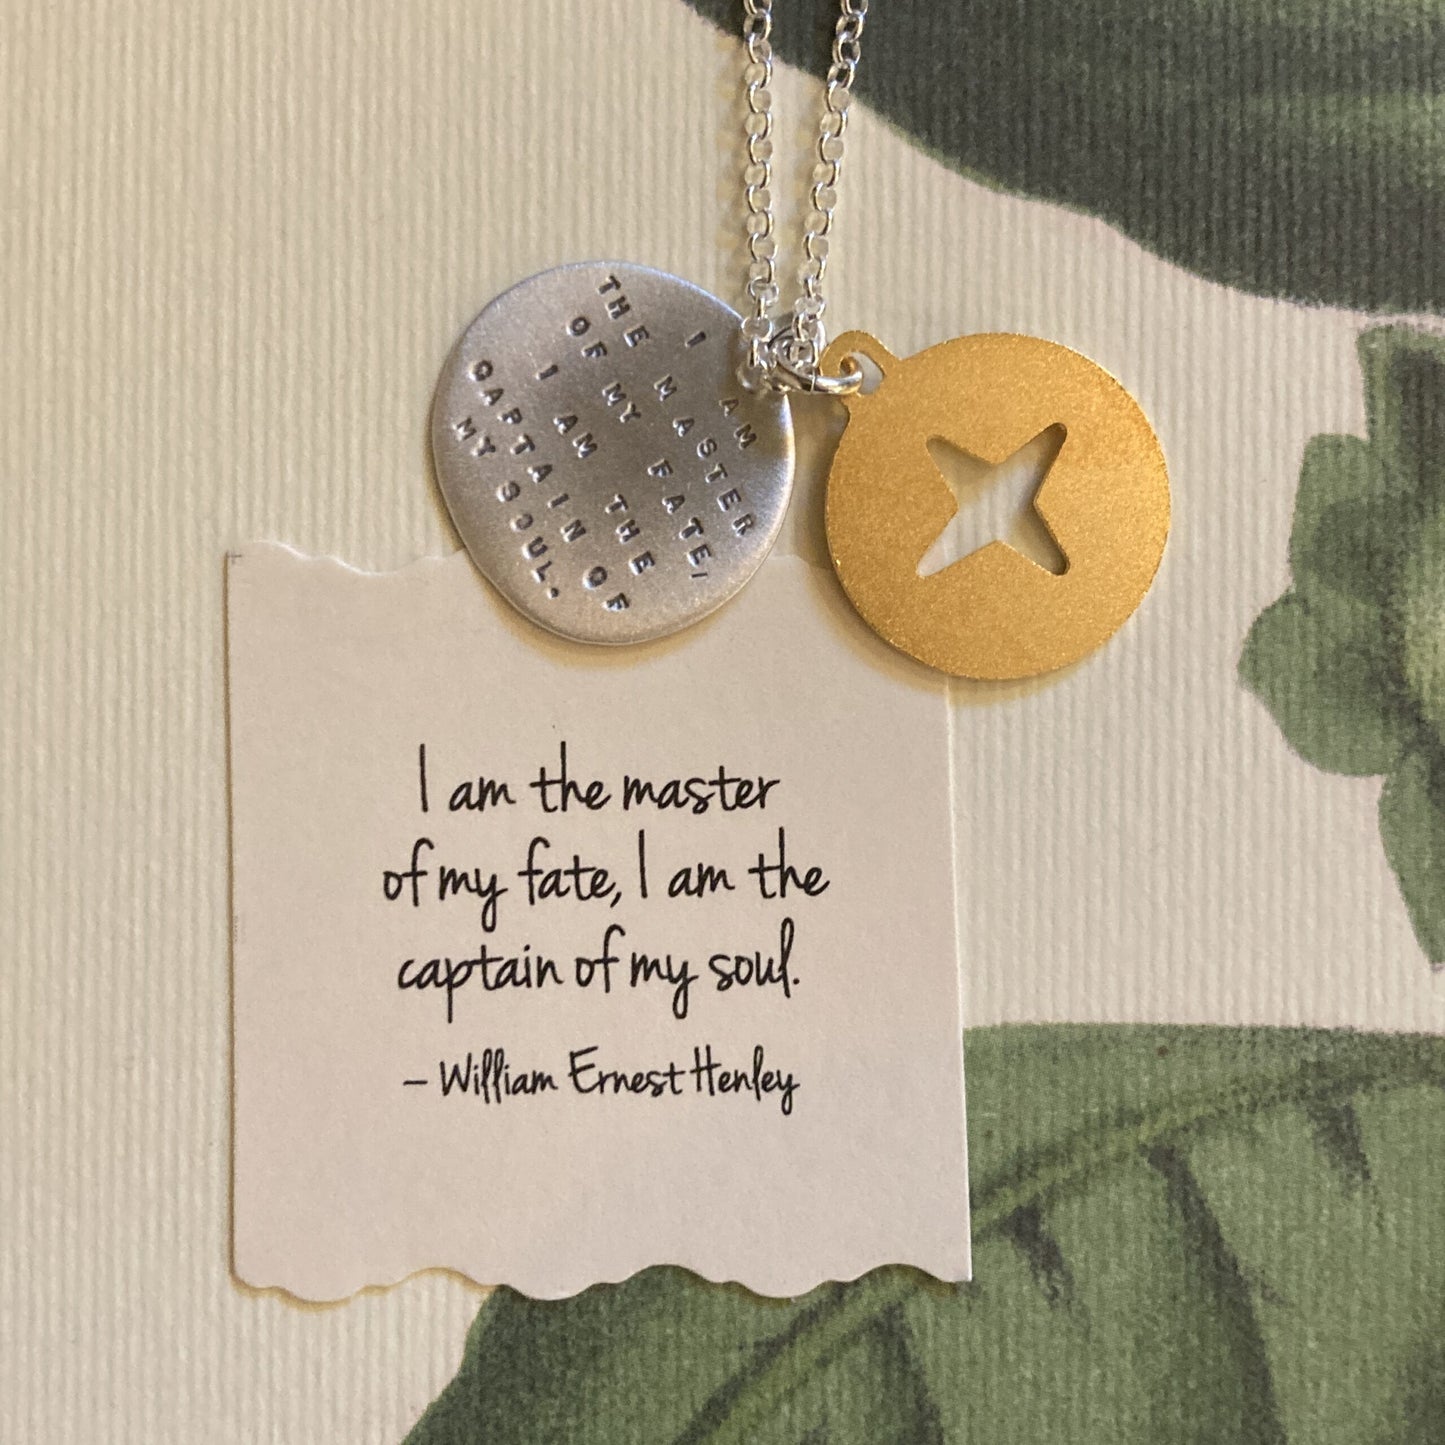 Ernest Henley Quote Necklace